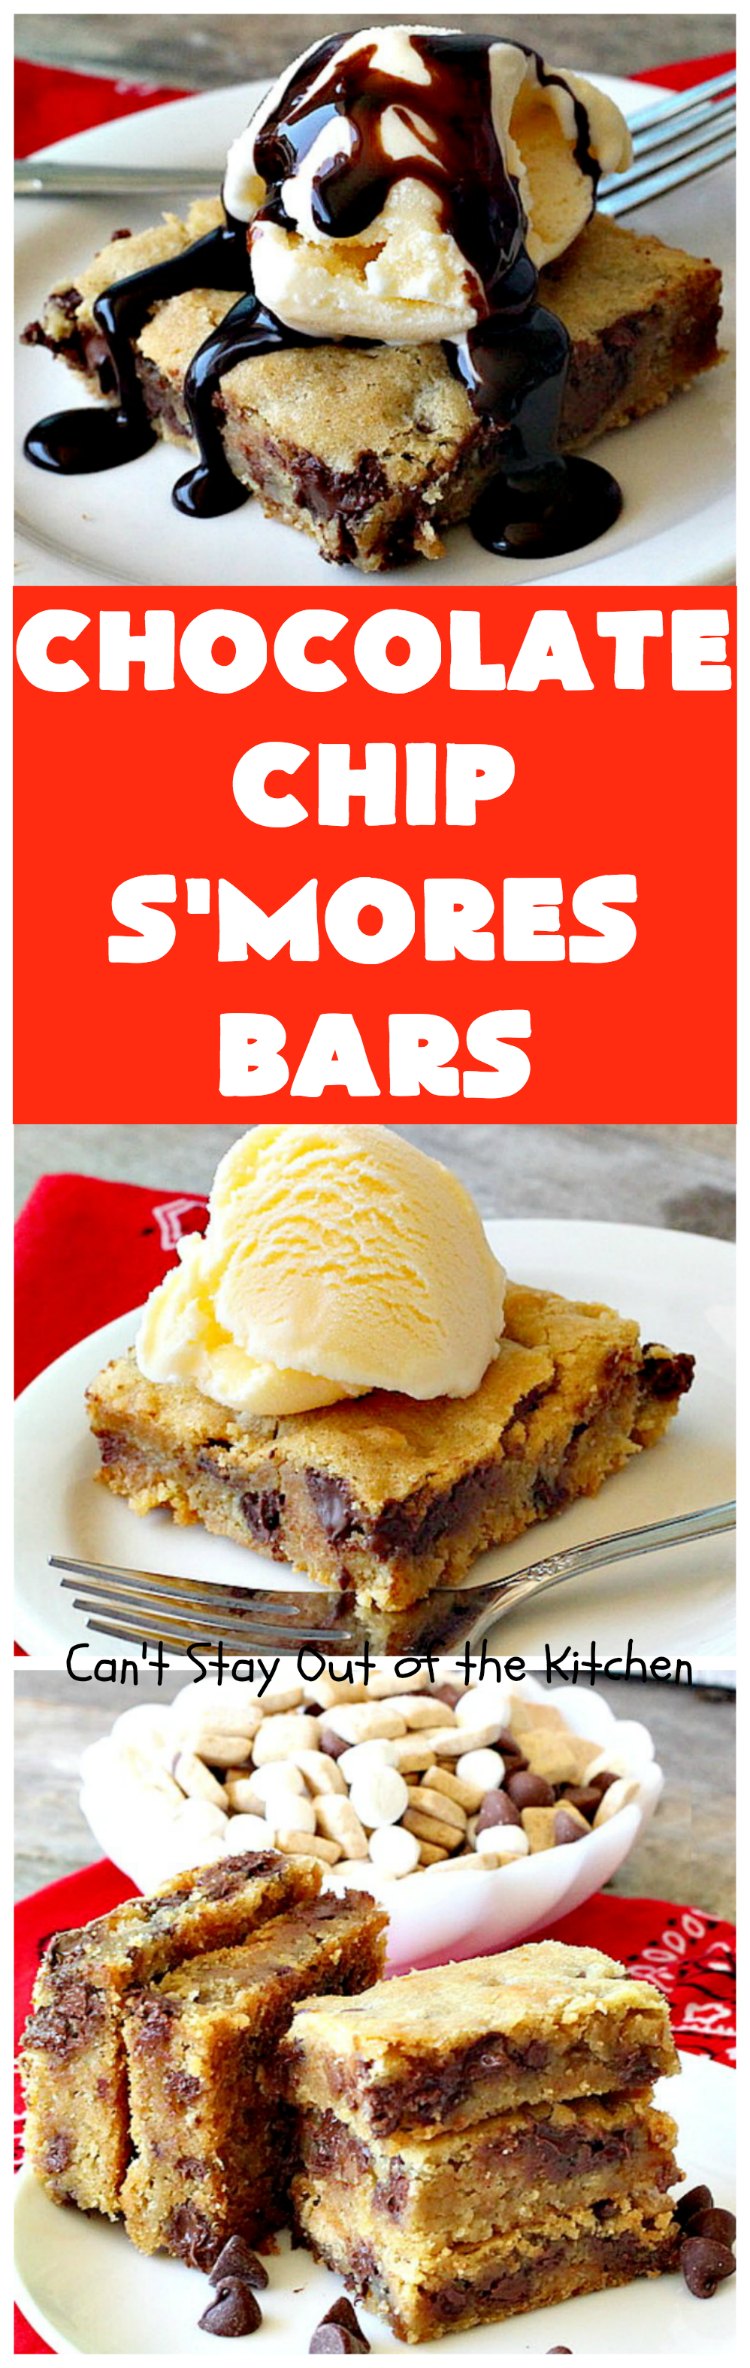 Chocolate Chip S'Mores Bars | Can't Stay Out of the Kitchen | these amazing #brownies use #chocolatechips & #Hersheys #SmoresBakingPieces. They're absolutely delightful and terrific for any kind of potluck, backyard barbecue or #holiday #baking. #Tailgating #Smores #chocolate